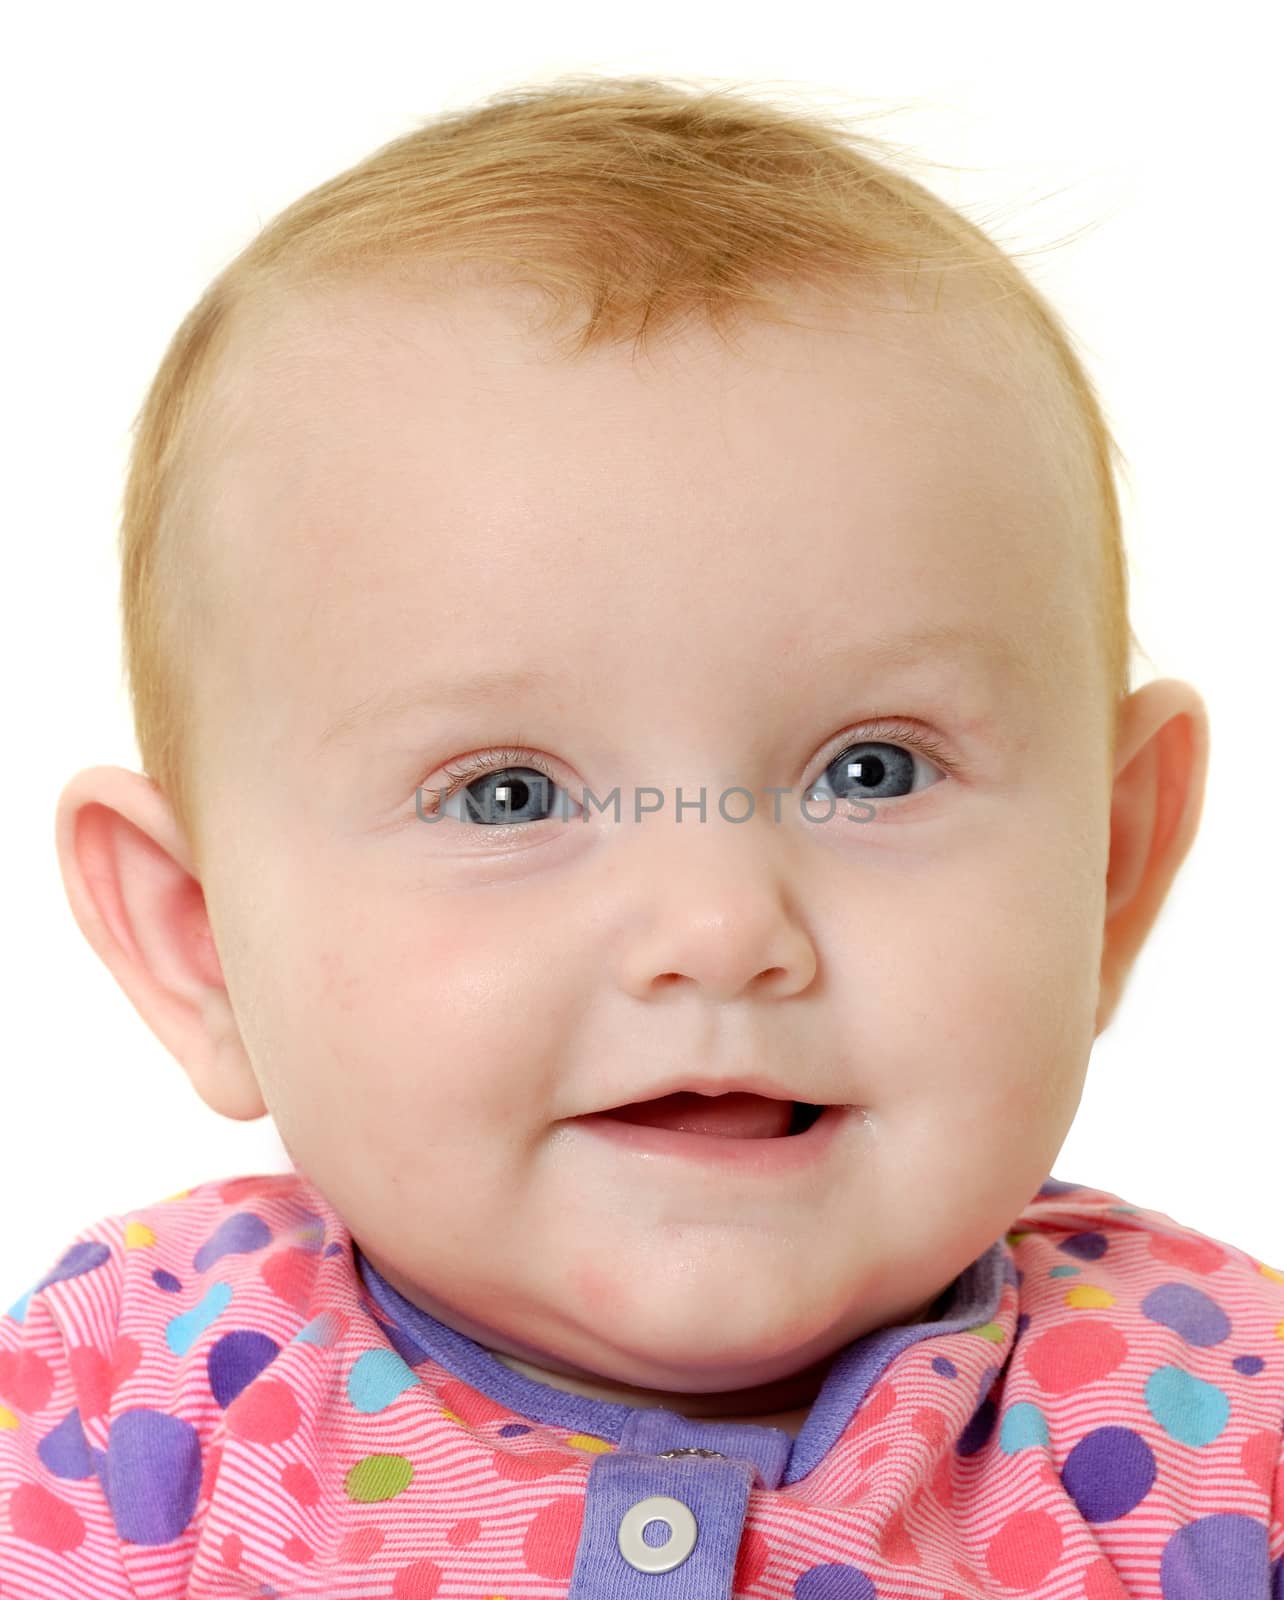 Face of a sweet happy baby 3 month young.Taken on a white background.